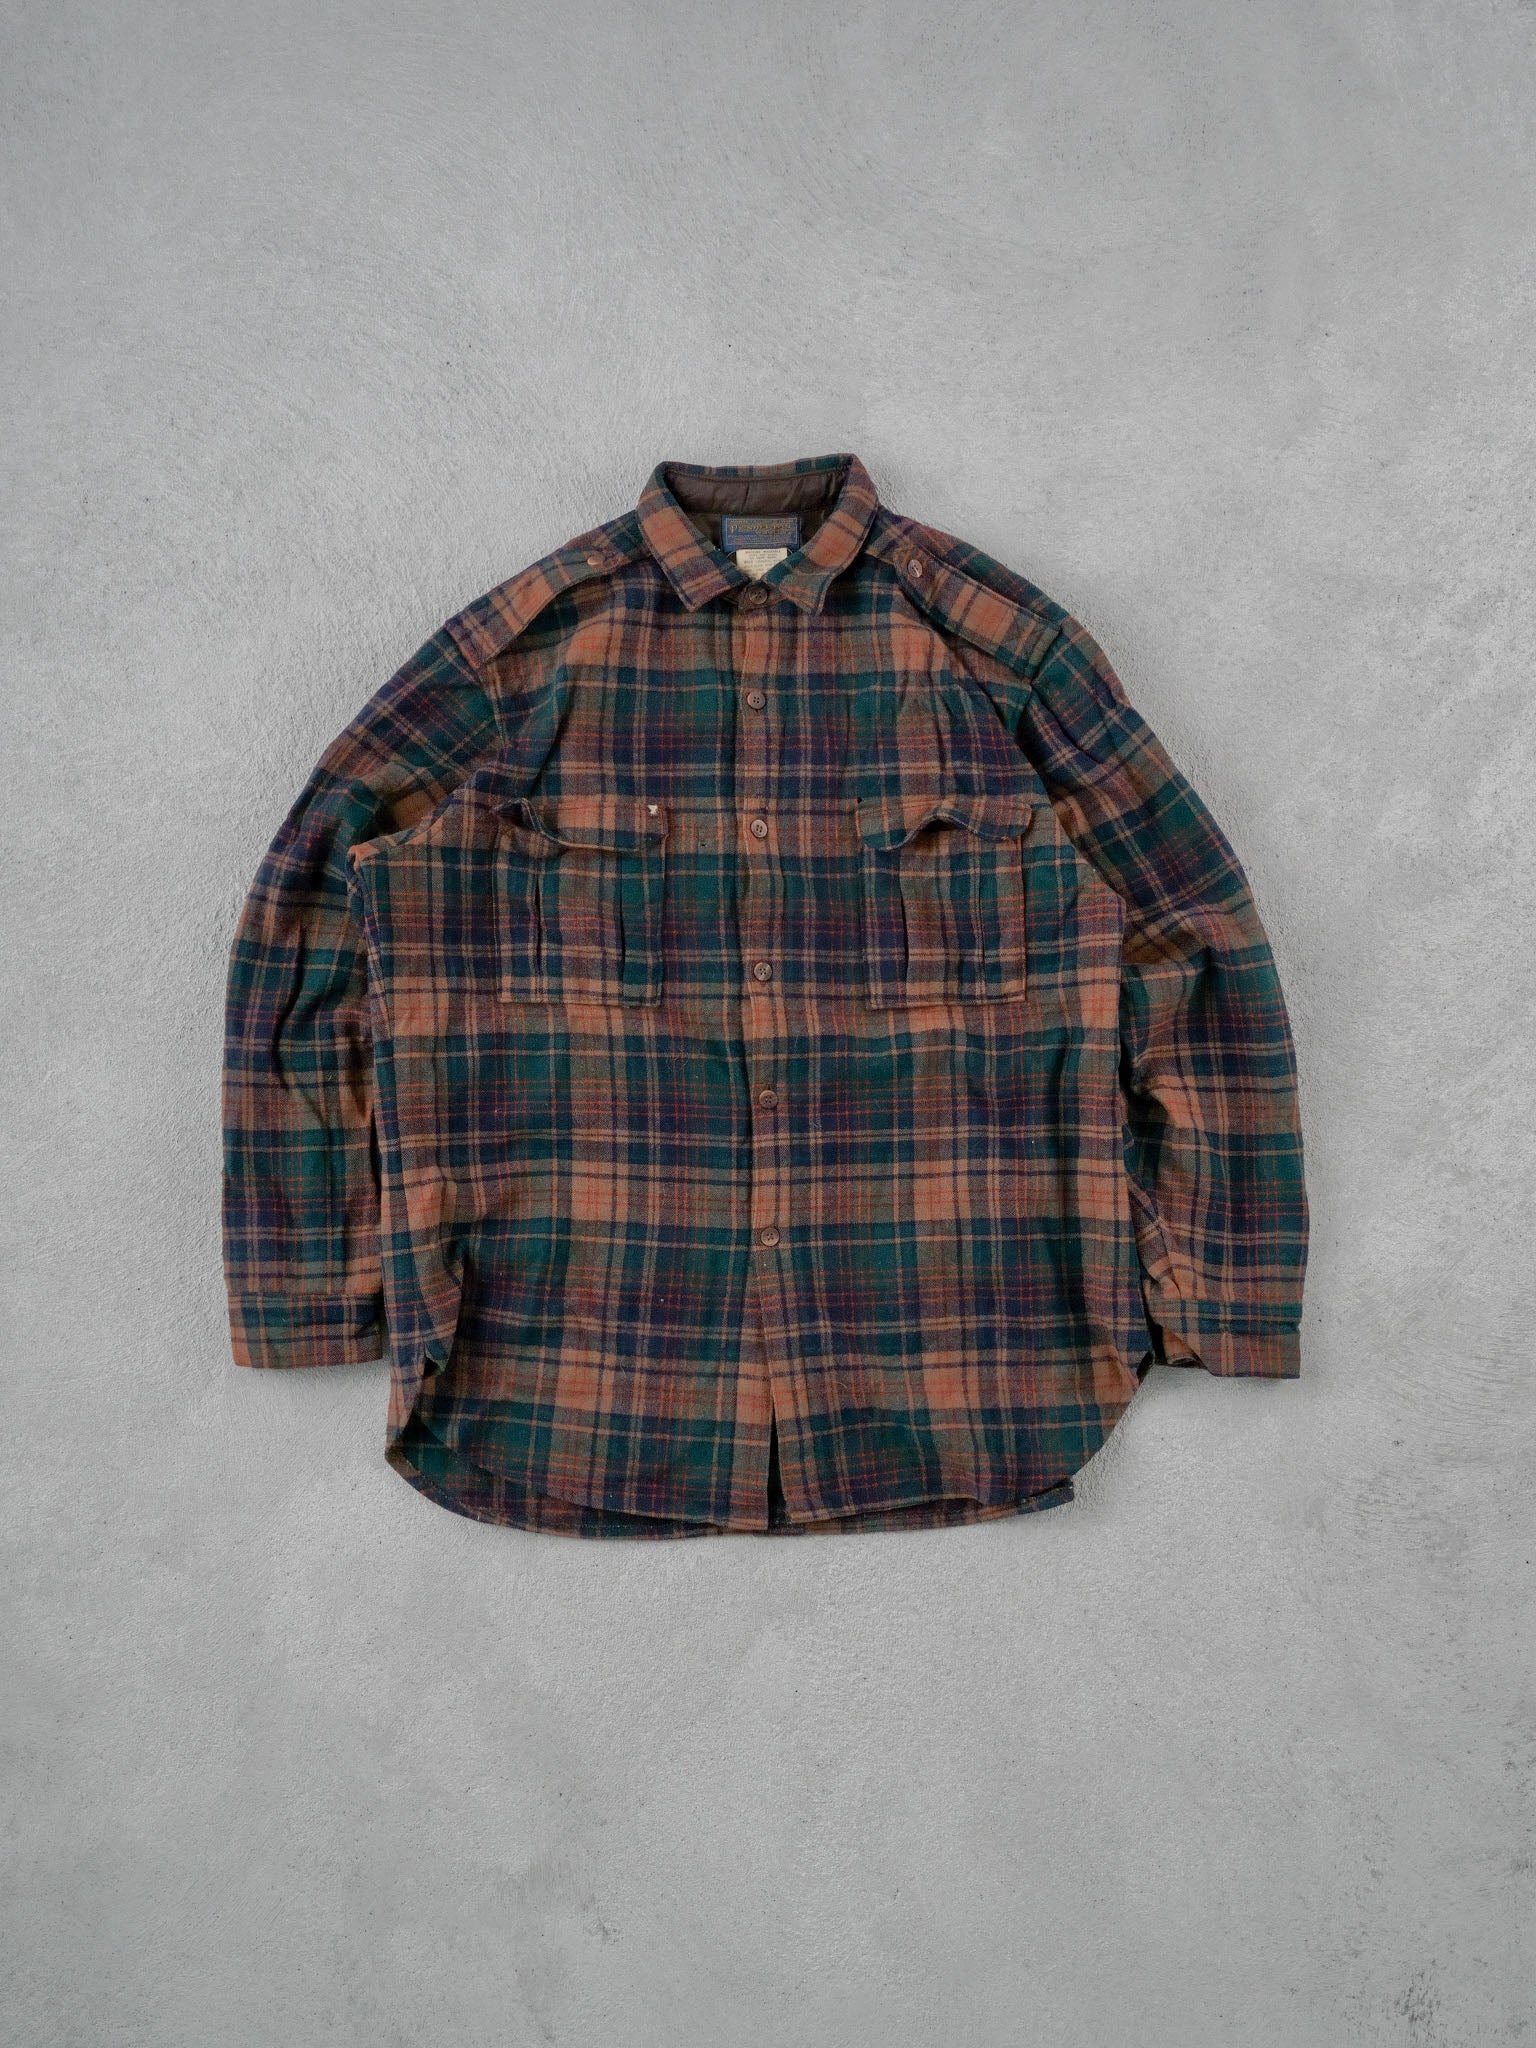 Vintage 90s Brown and Green Penoleton Wool Plaid Flannel (L)